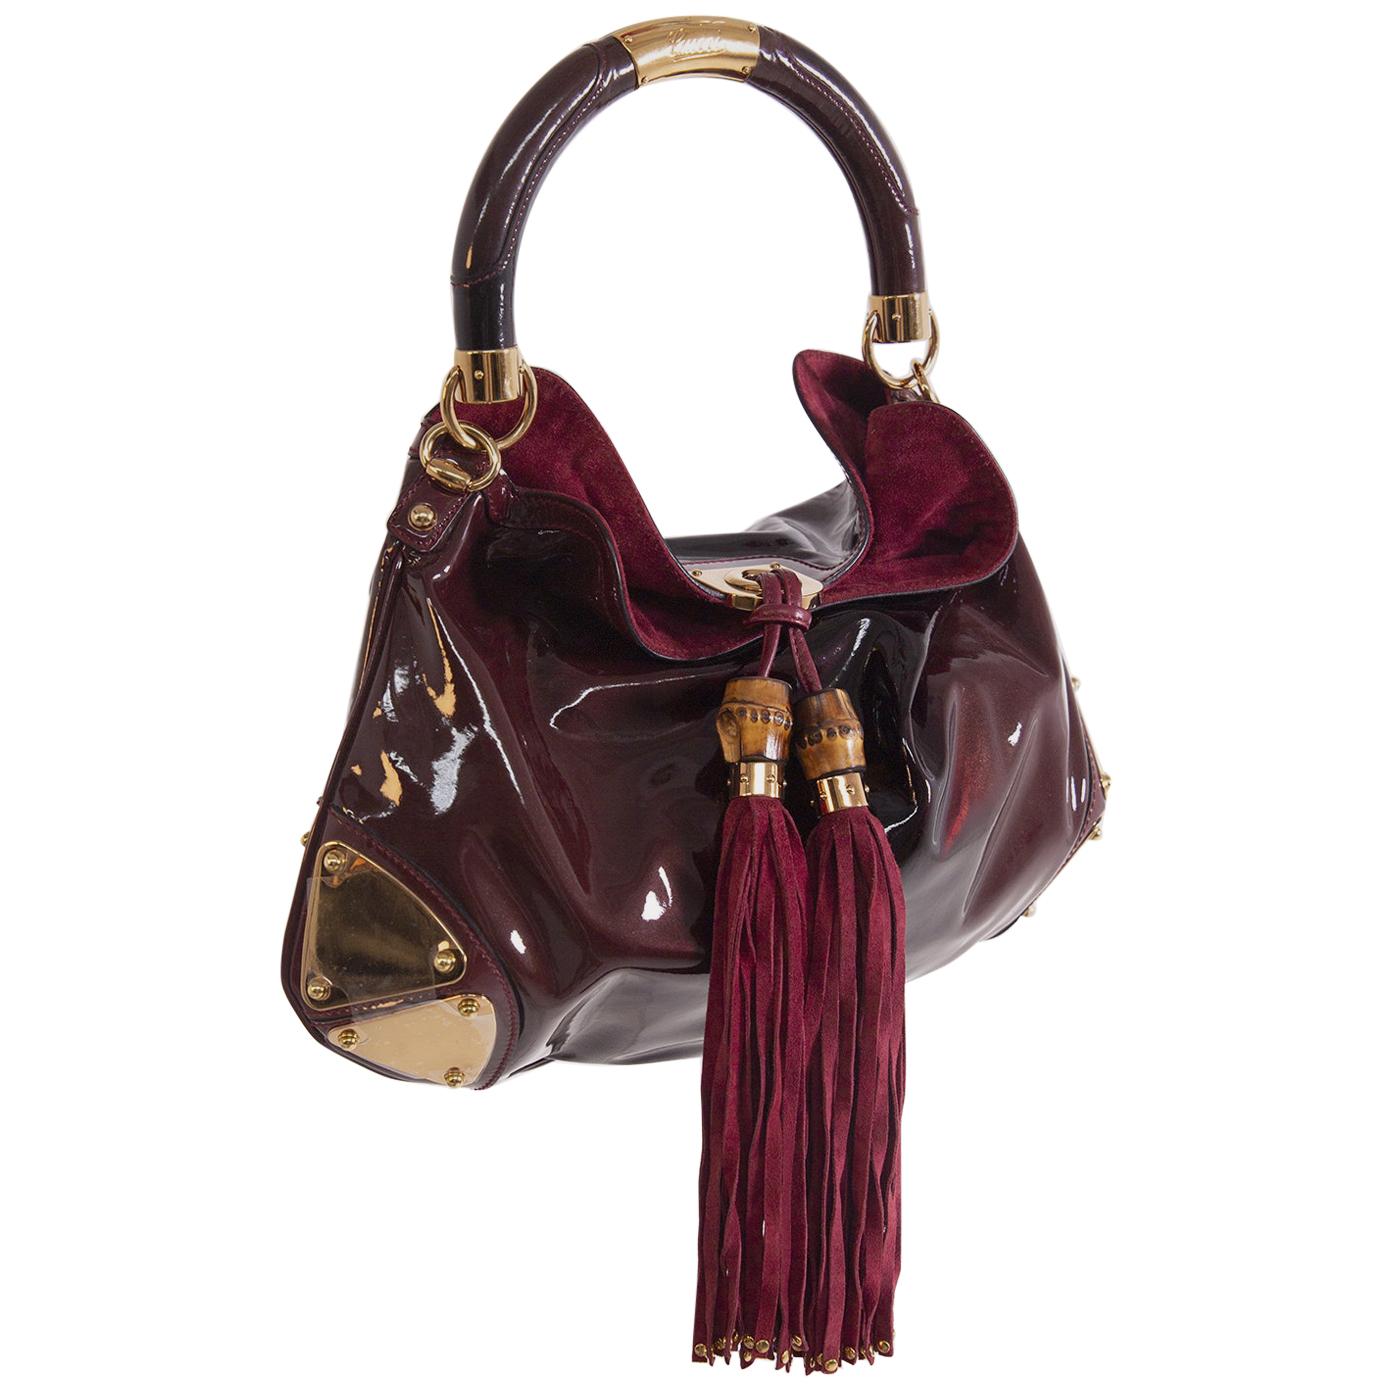 Gucci Indy Patent Leather Bordeaux Hobo Bag